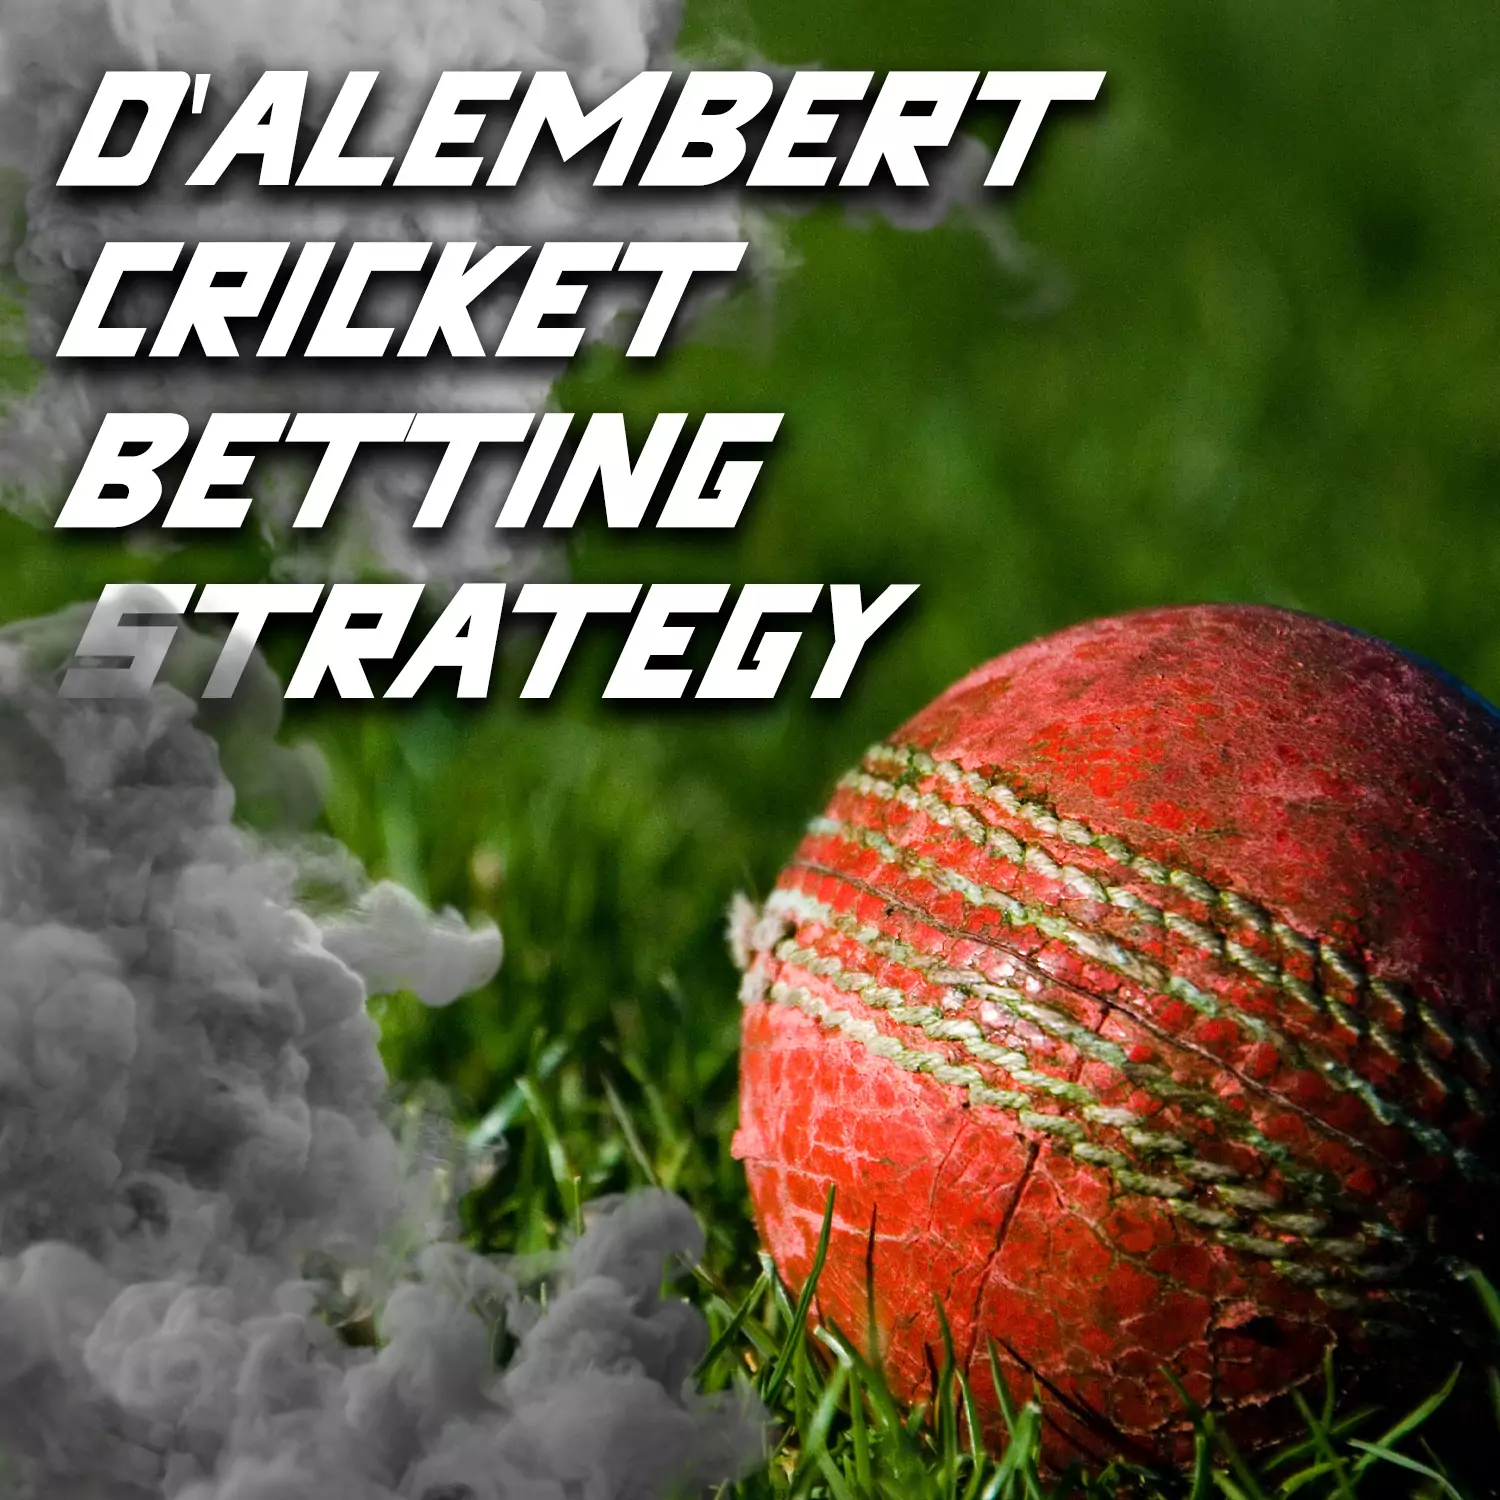 D'Alembert Cricket Betting Strategy is popular method for cricket betting.